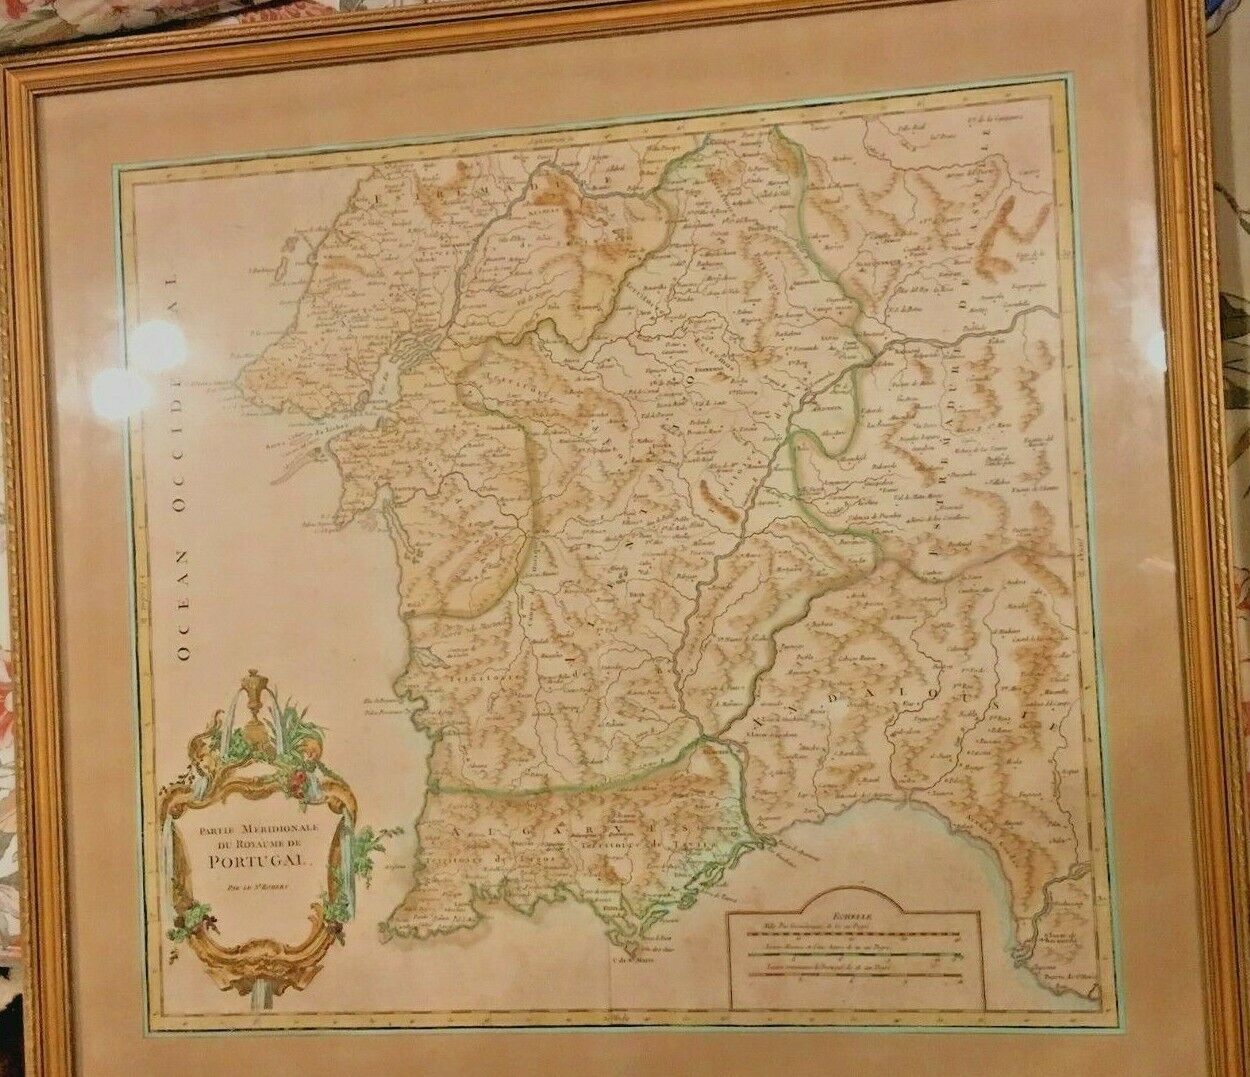 1751 Vaugondy Maps of Southern and Northern Portugal, framed Без бренда